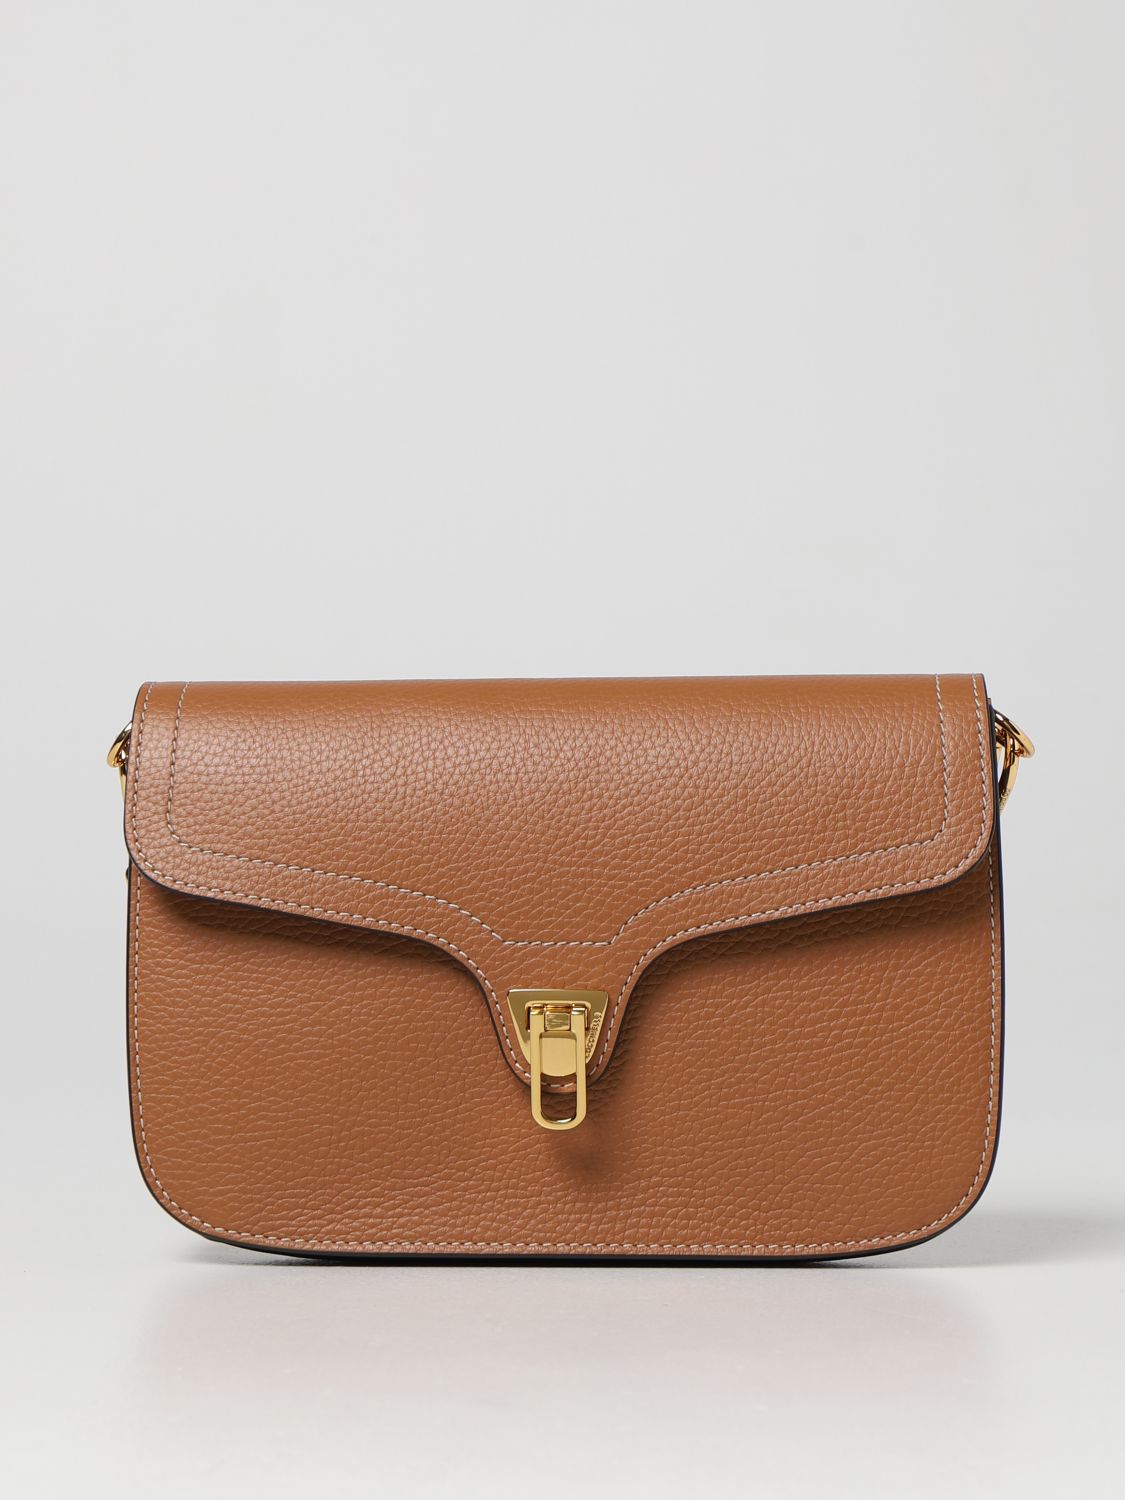 Coccinelle Bag In Grained Leather In Honey | ModeSens